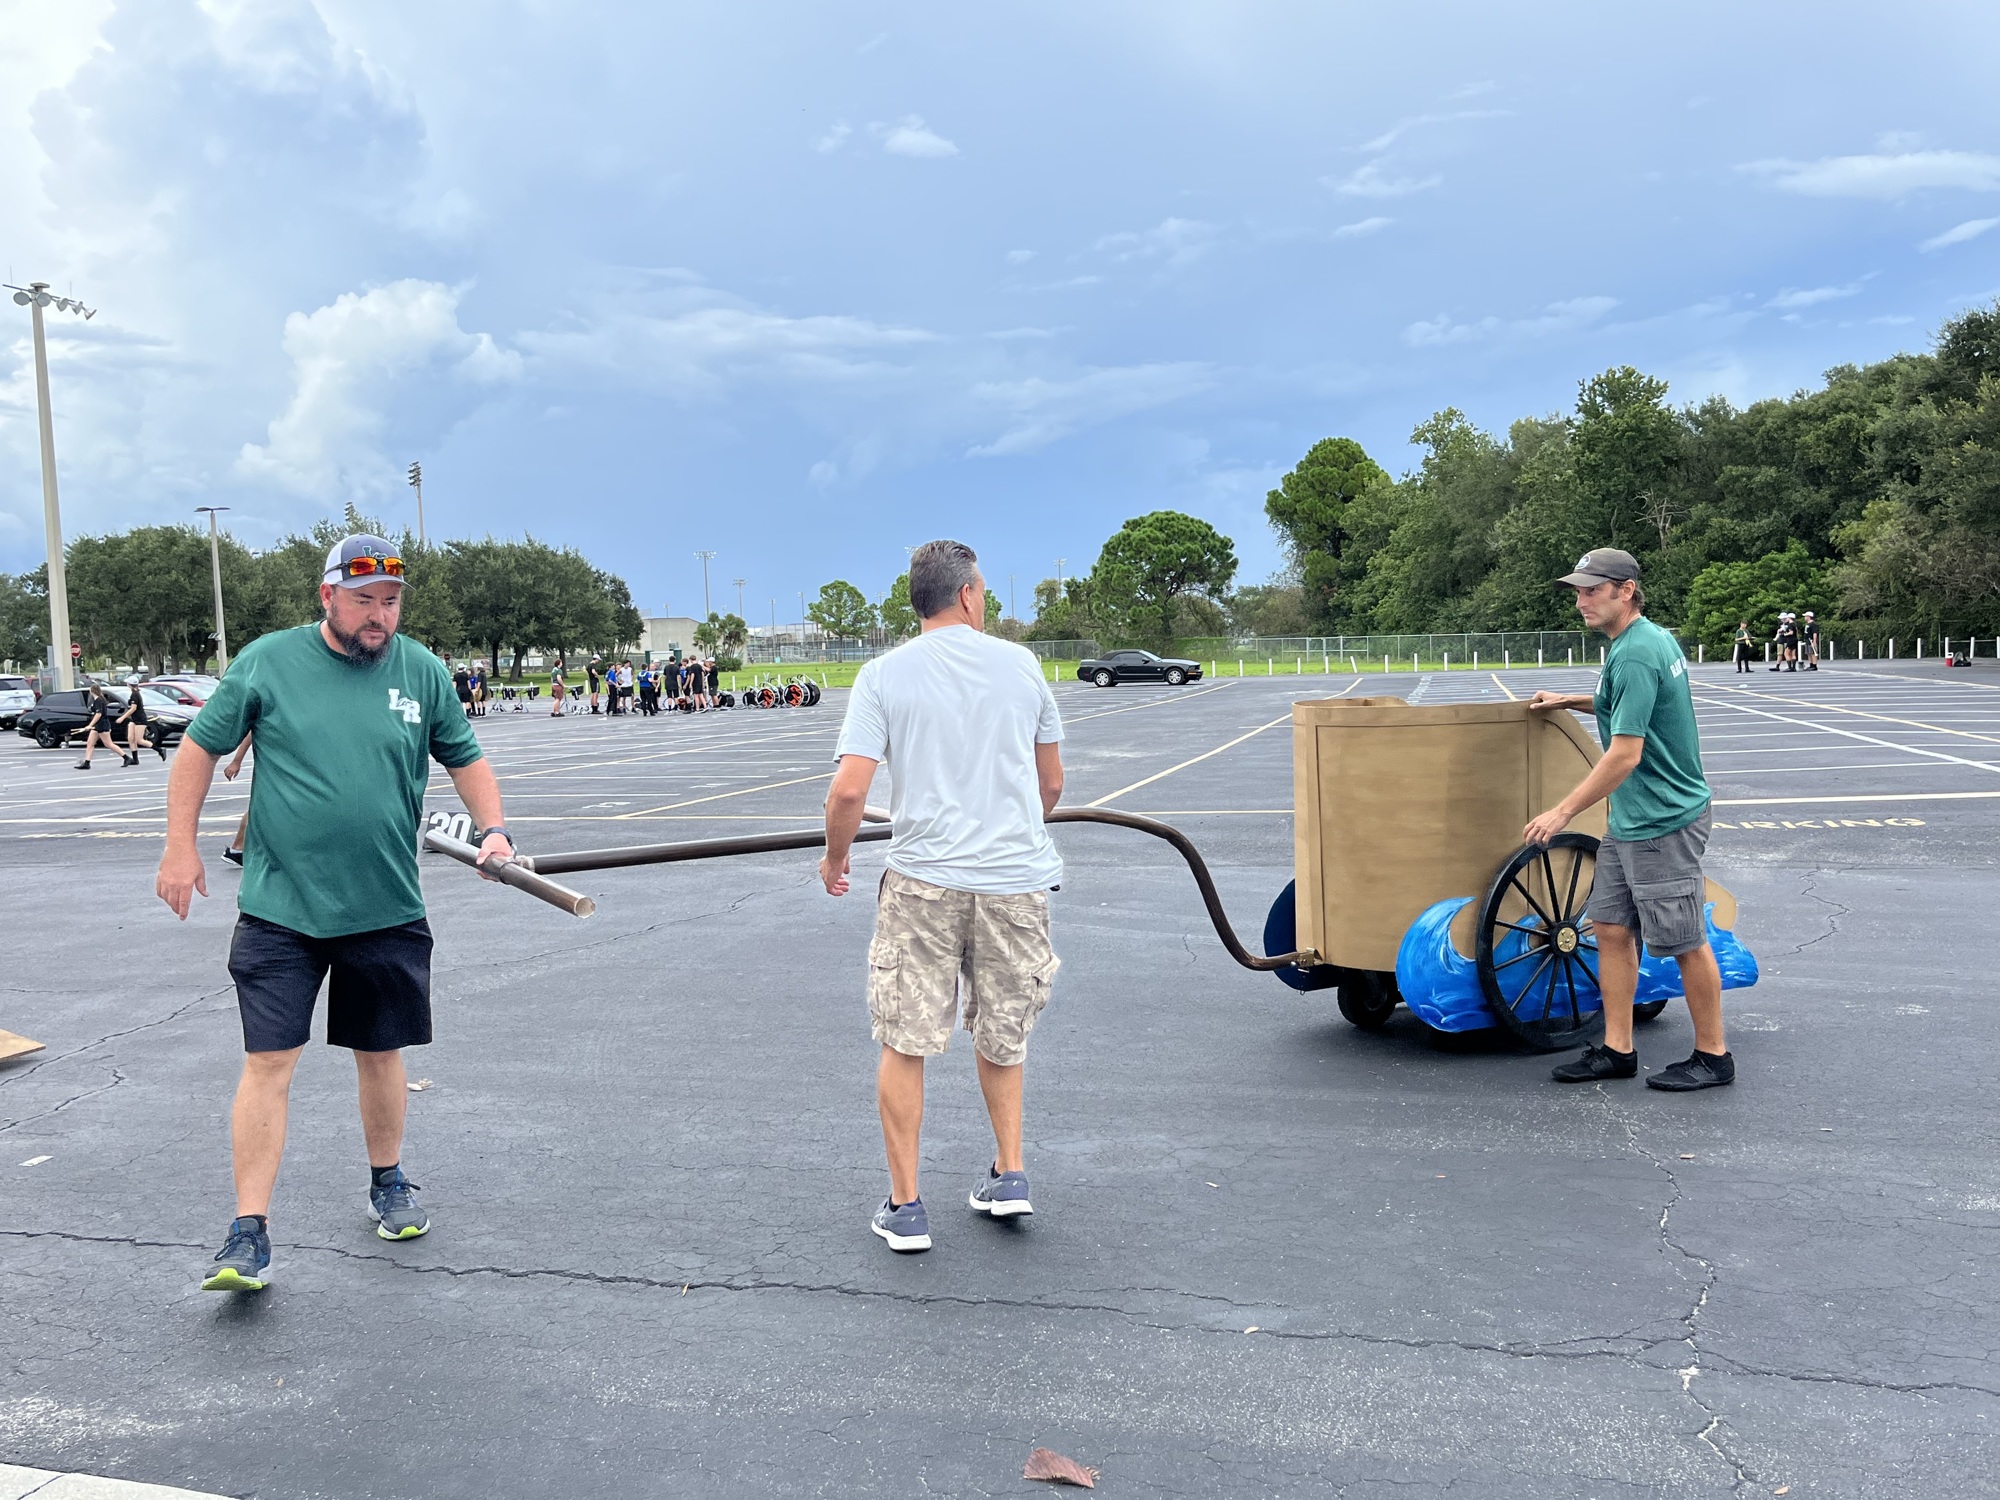 Greg Burden, Marty Gnad and Joseph Flesche, who are Ranch Hands for Lakewood Ranch High School's band, unload the prop chariot from the trailers. The Ranch Hands build the props and load and unload them from trailers.